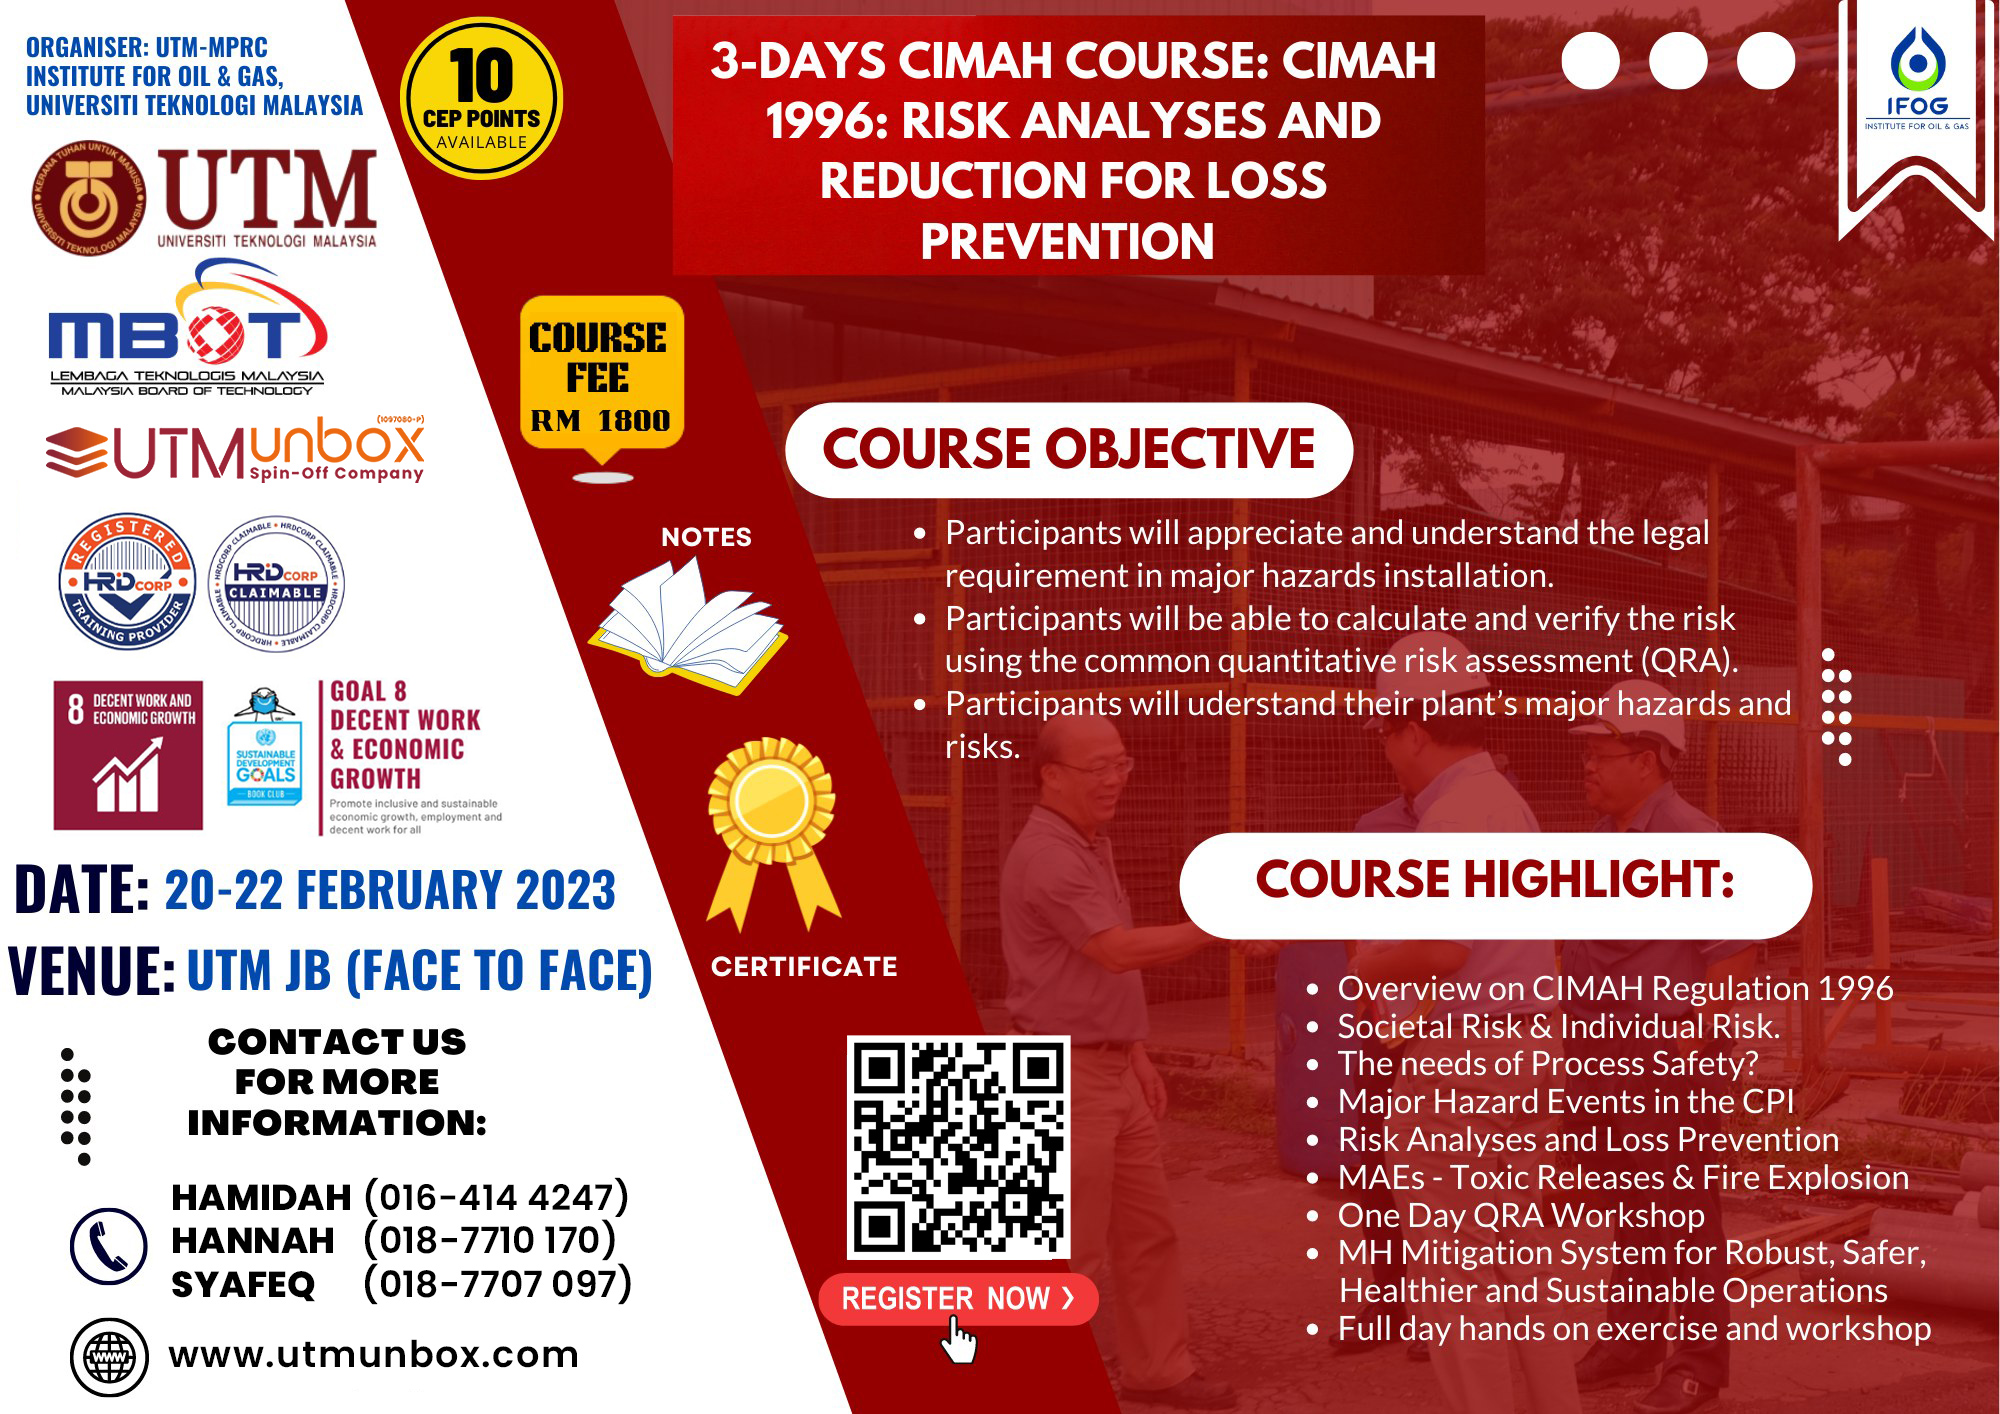 You are currently viewing CIMAH 1996: RISK ANALYSES AND REDUCTION IN LOSS PREVENTION